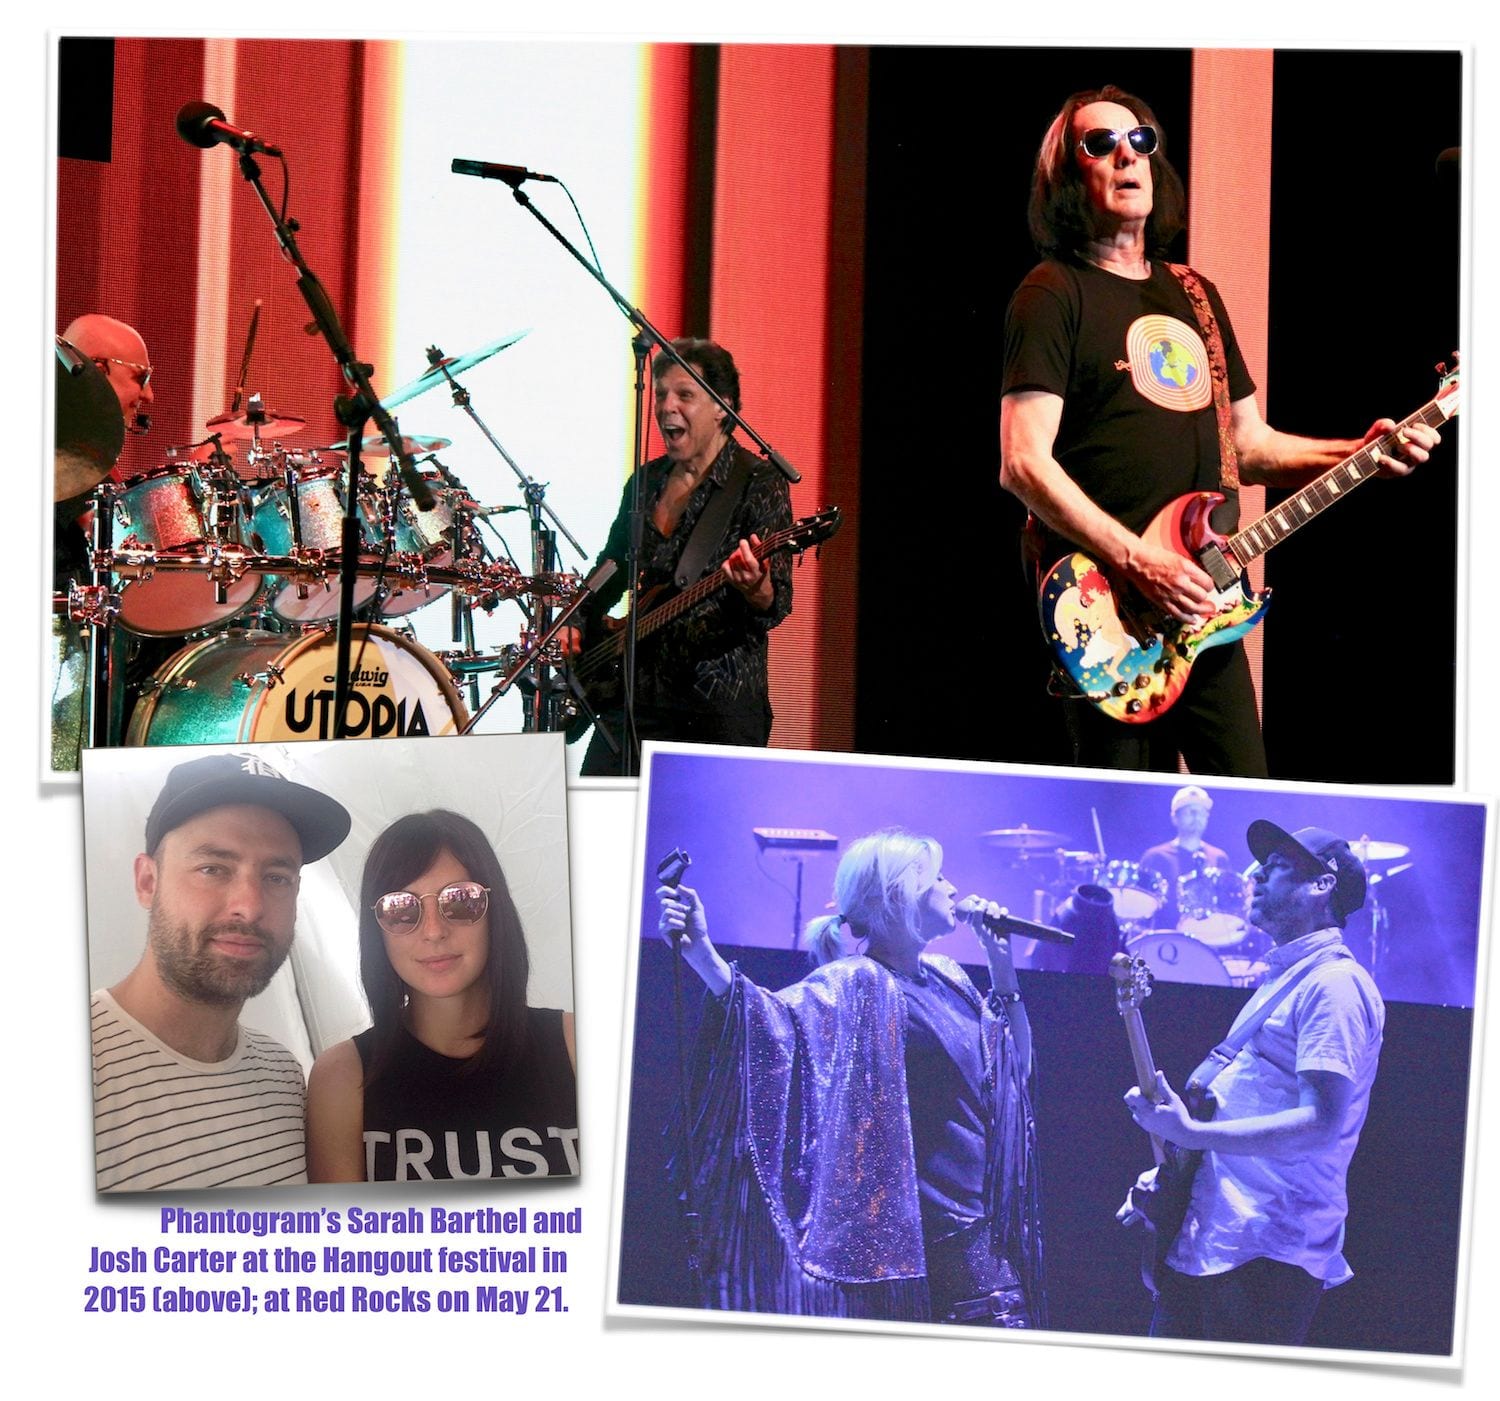 Reliving Fandemonium on the Road to Utopia With Todd Rundgren and Phantogram